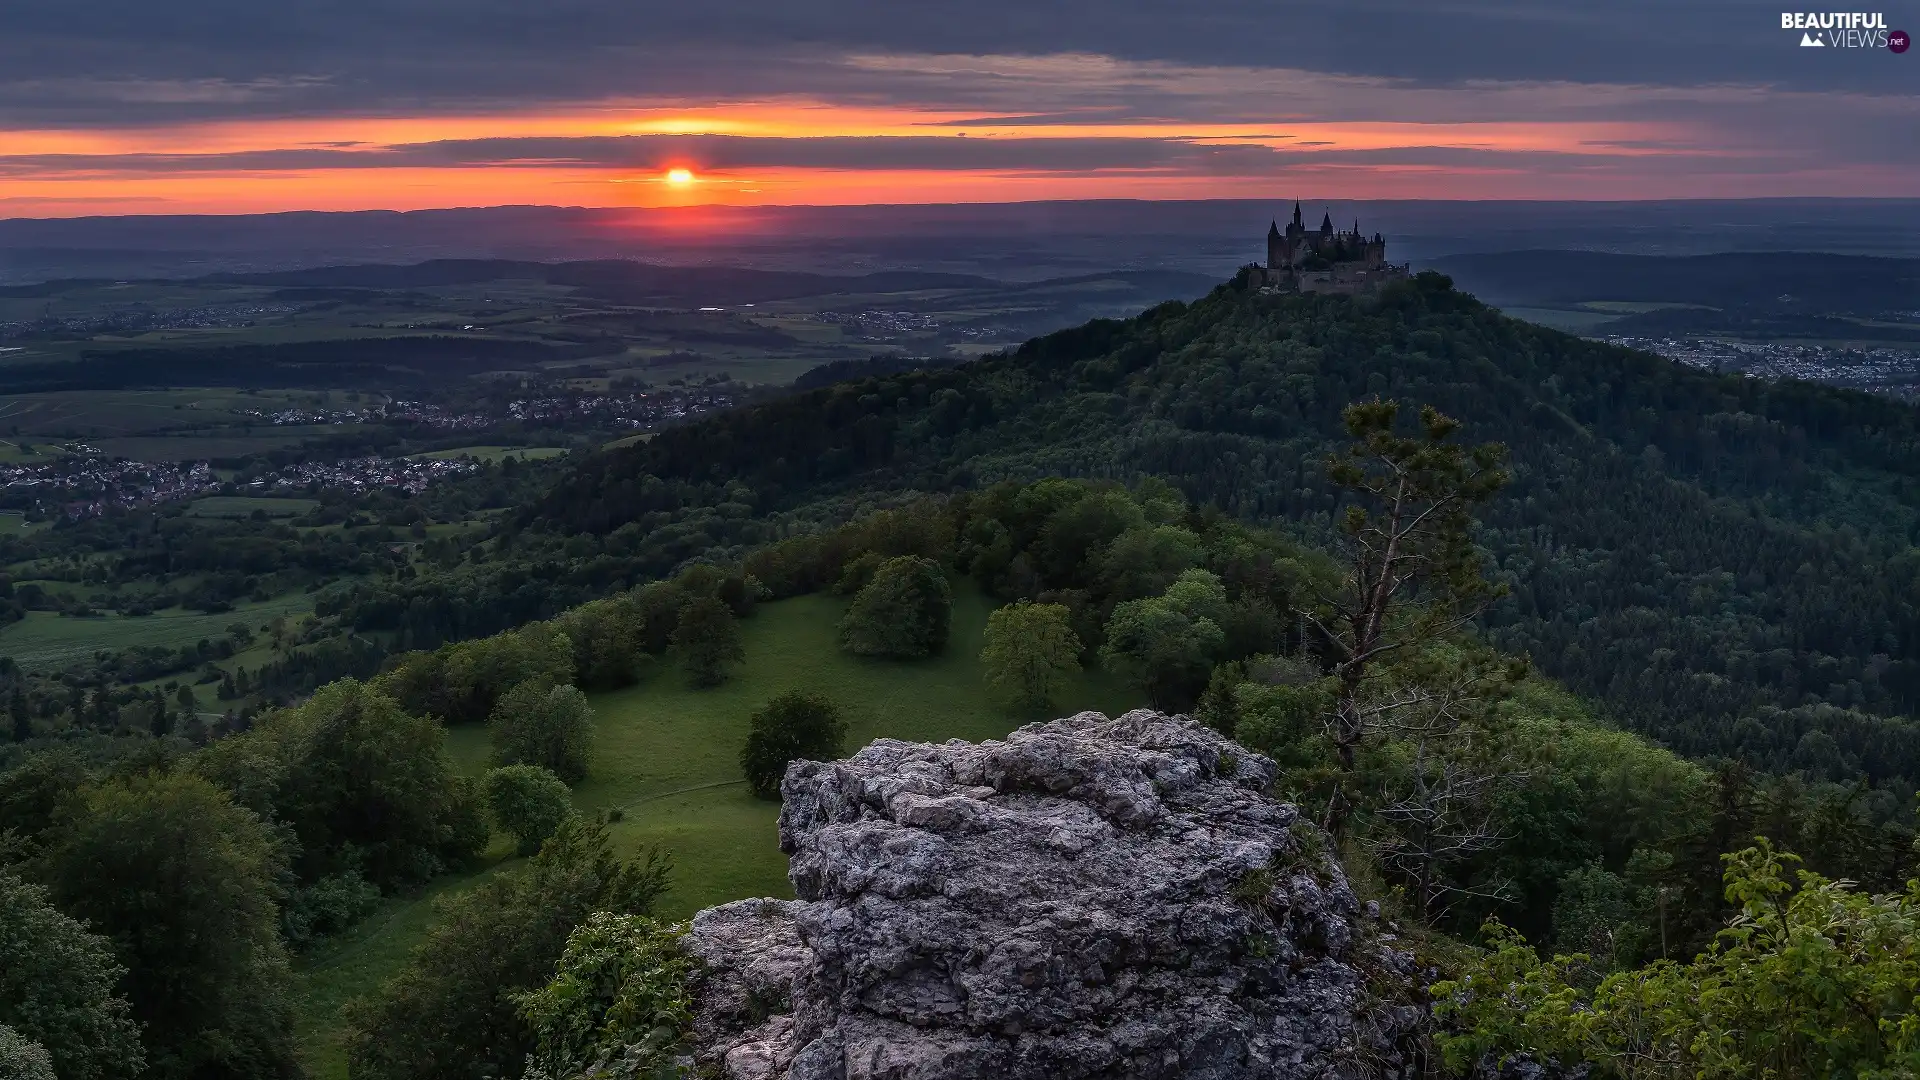 Hohenzollern Castle, Germany, forest, Great Sunsets, viewes, Stone, The Hills, Hohenzollern Mountain, Baden-Württemberg, clouds, trees